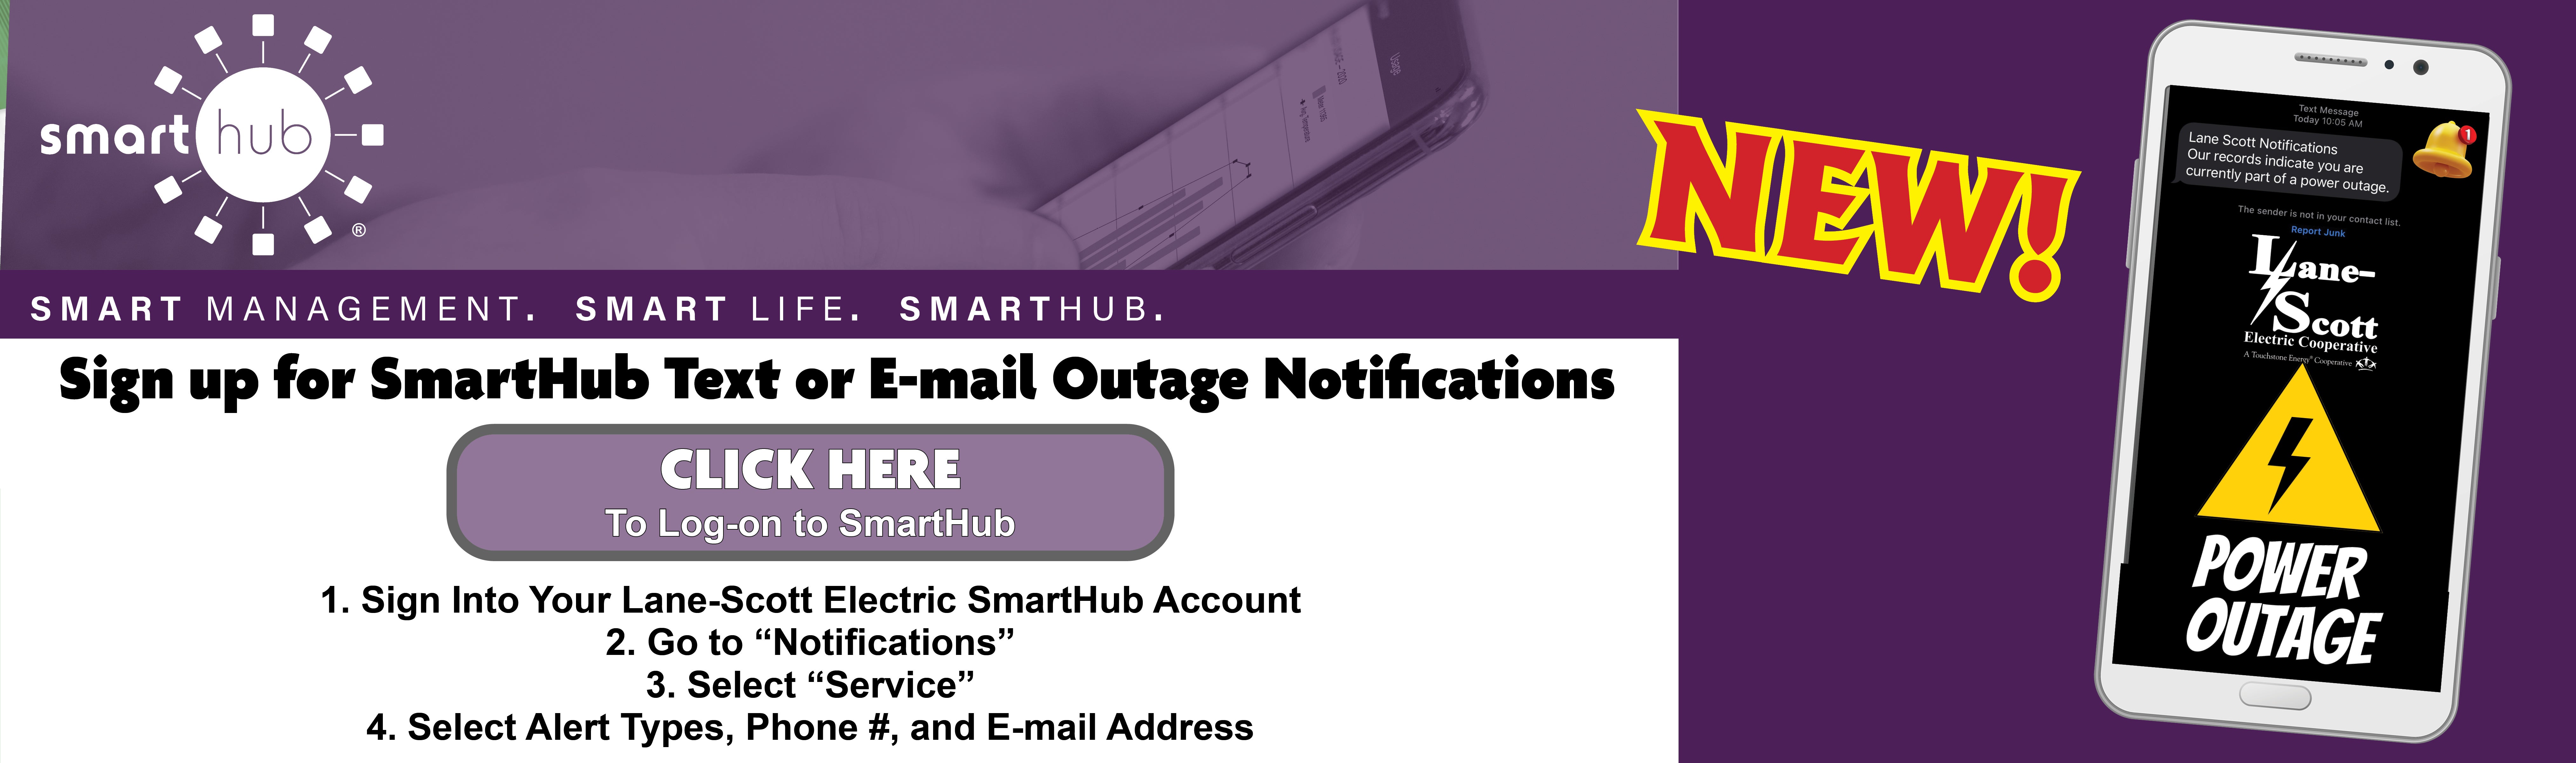 Outage Text and E-mail Notifications